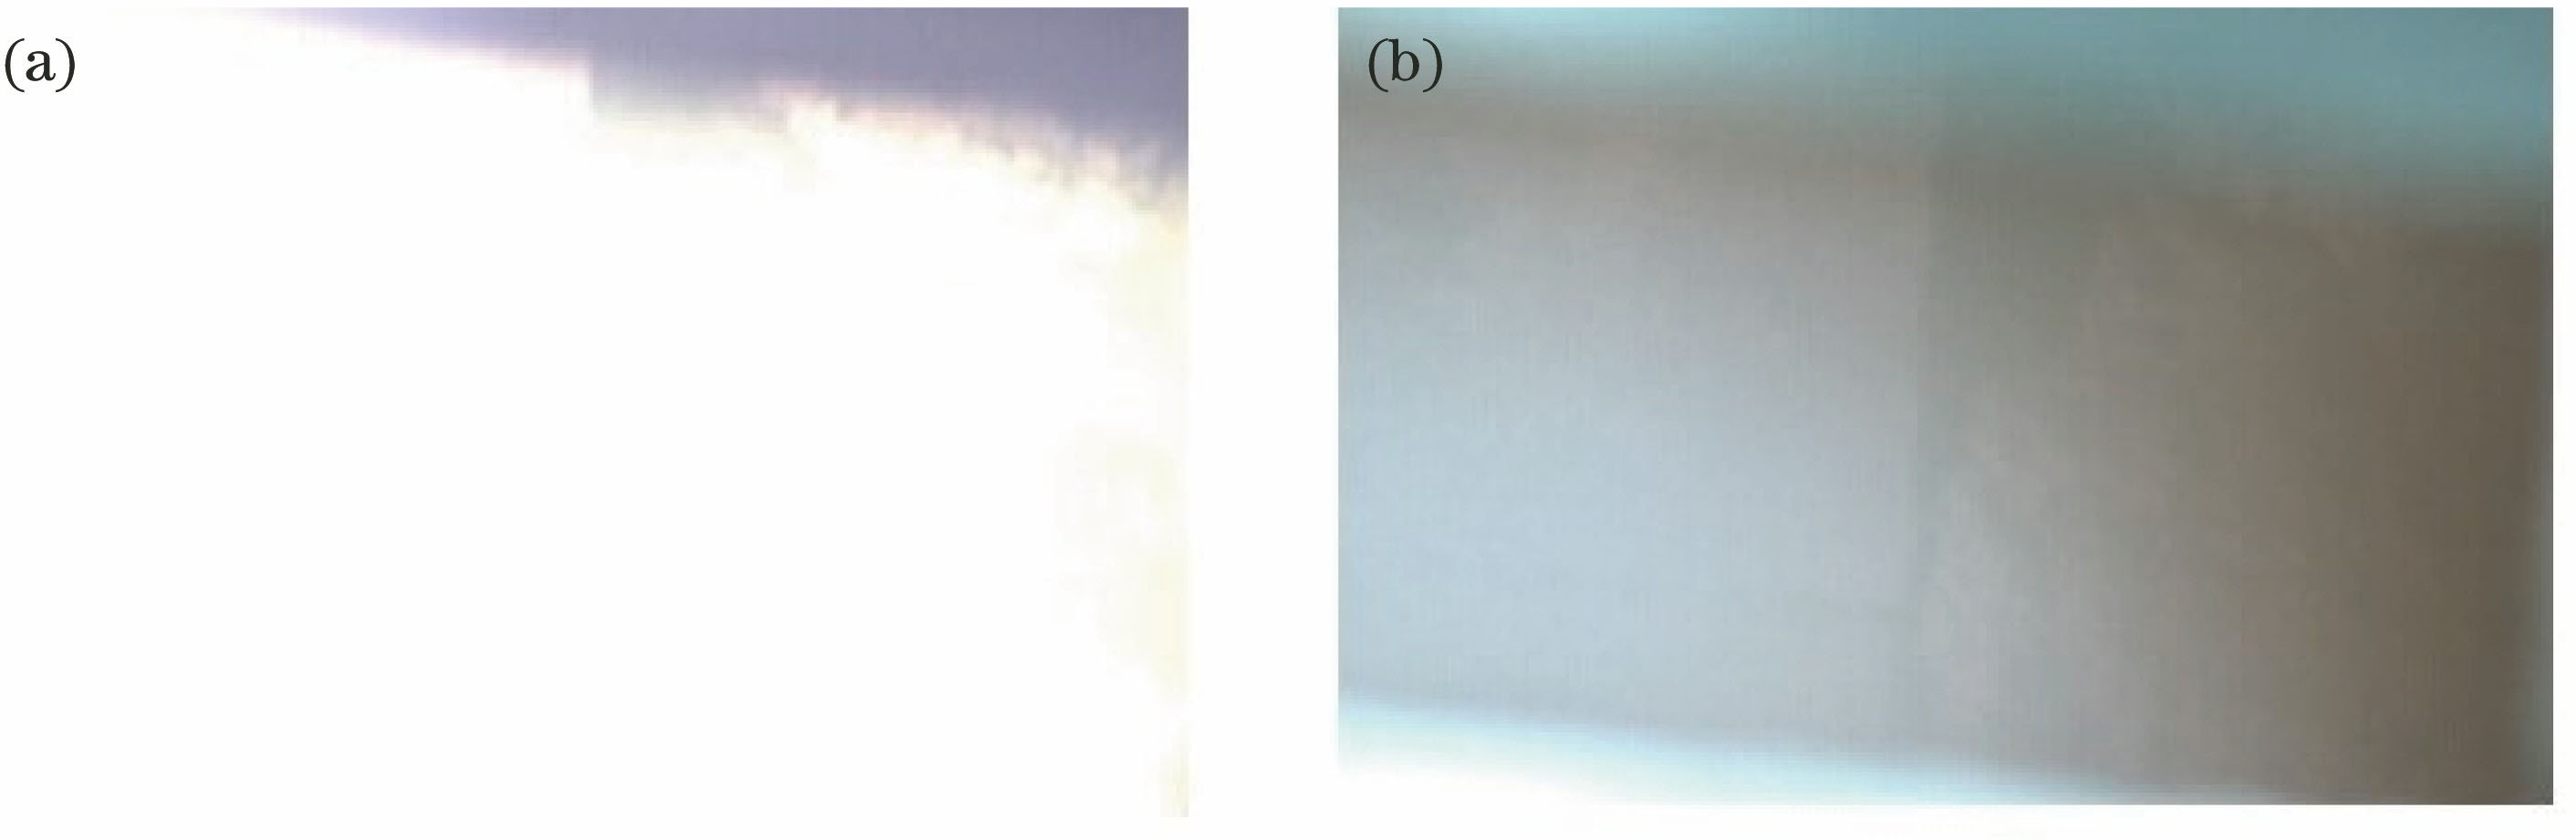 Smoke in the feeding and stirring process. (a) Smoke in feeding stage; (b) smoke in stirring stage